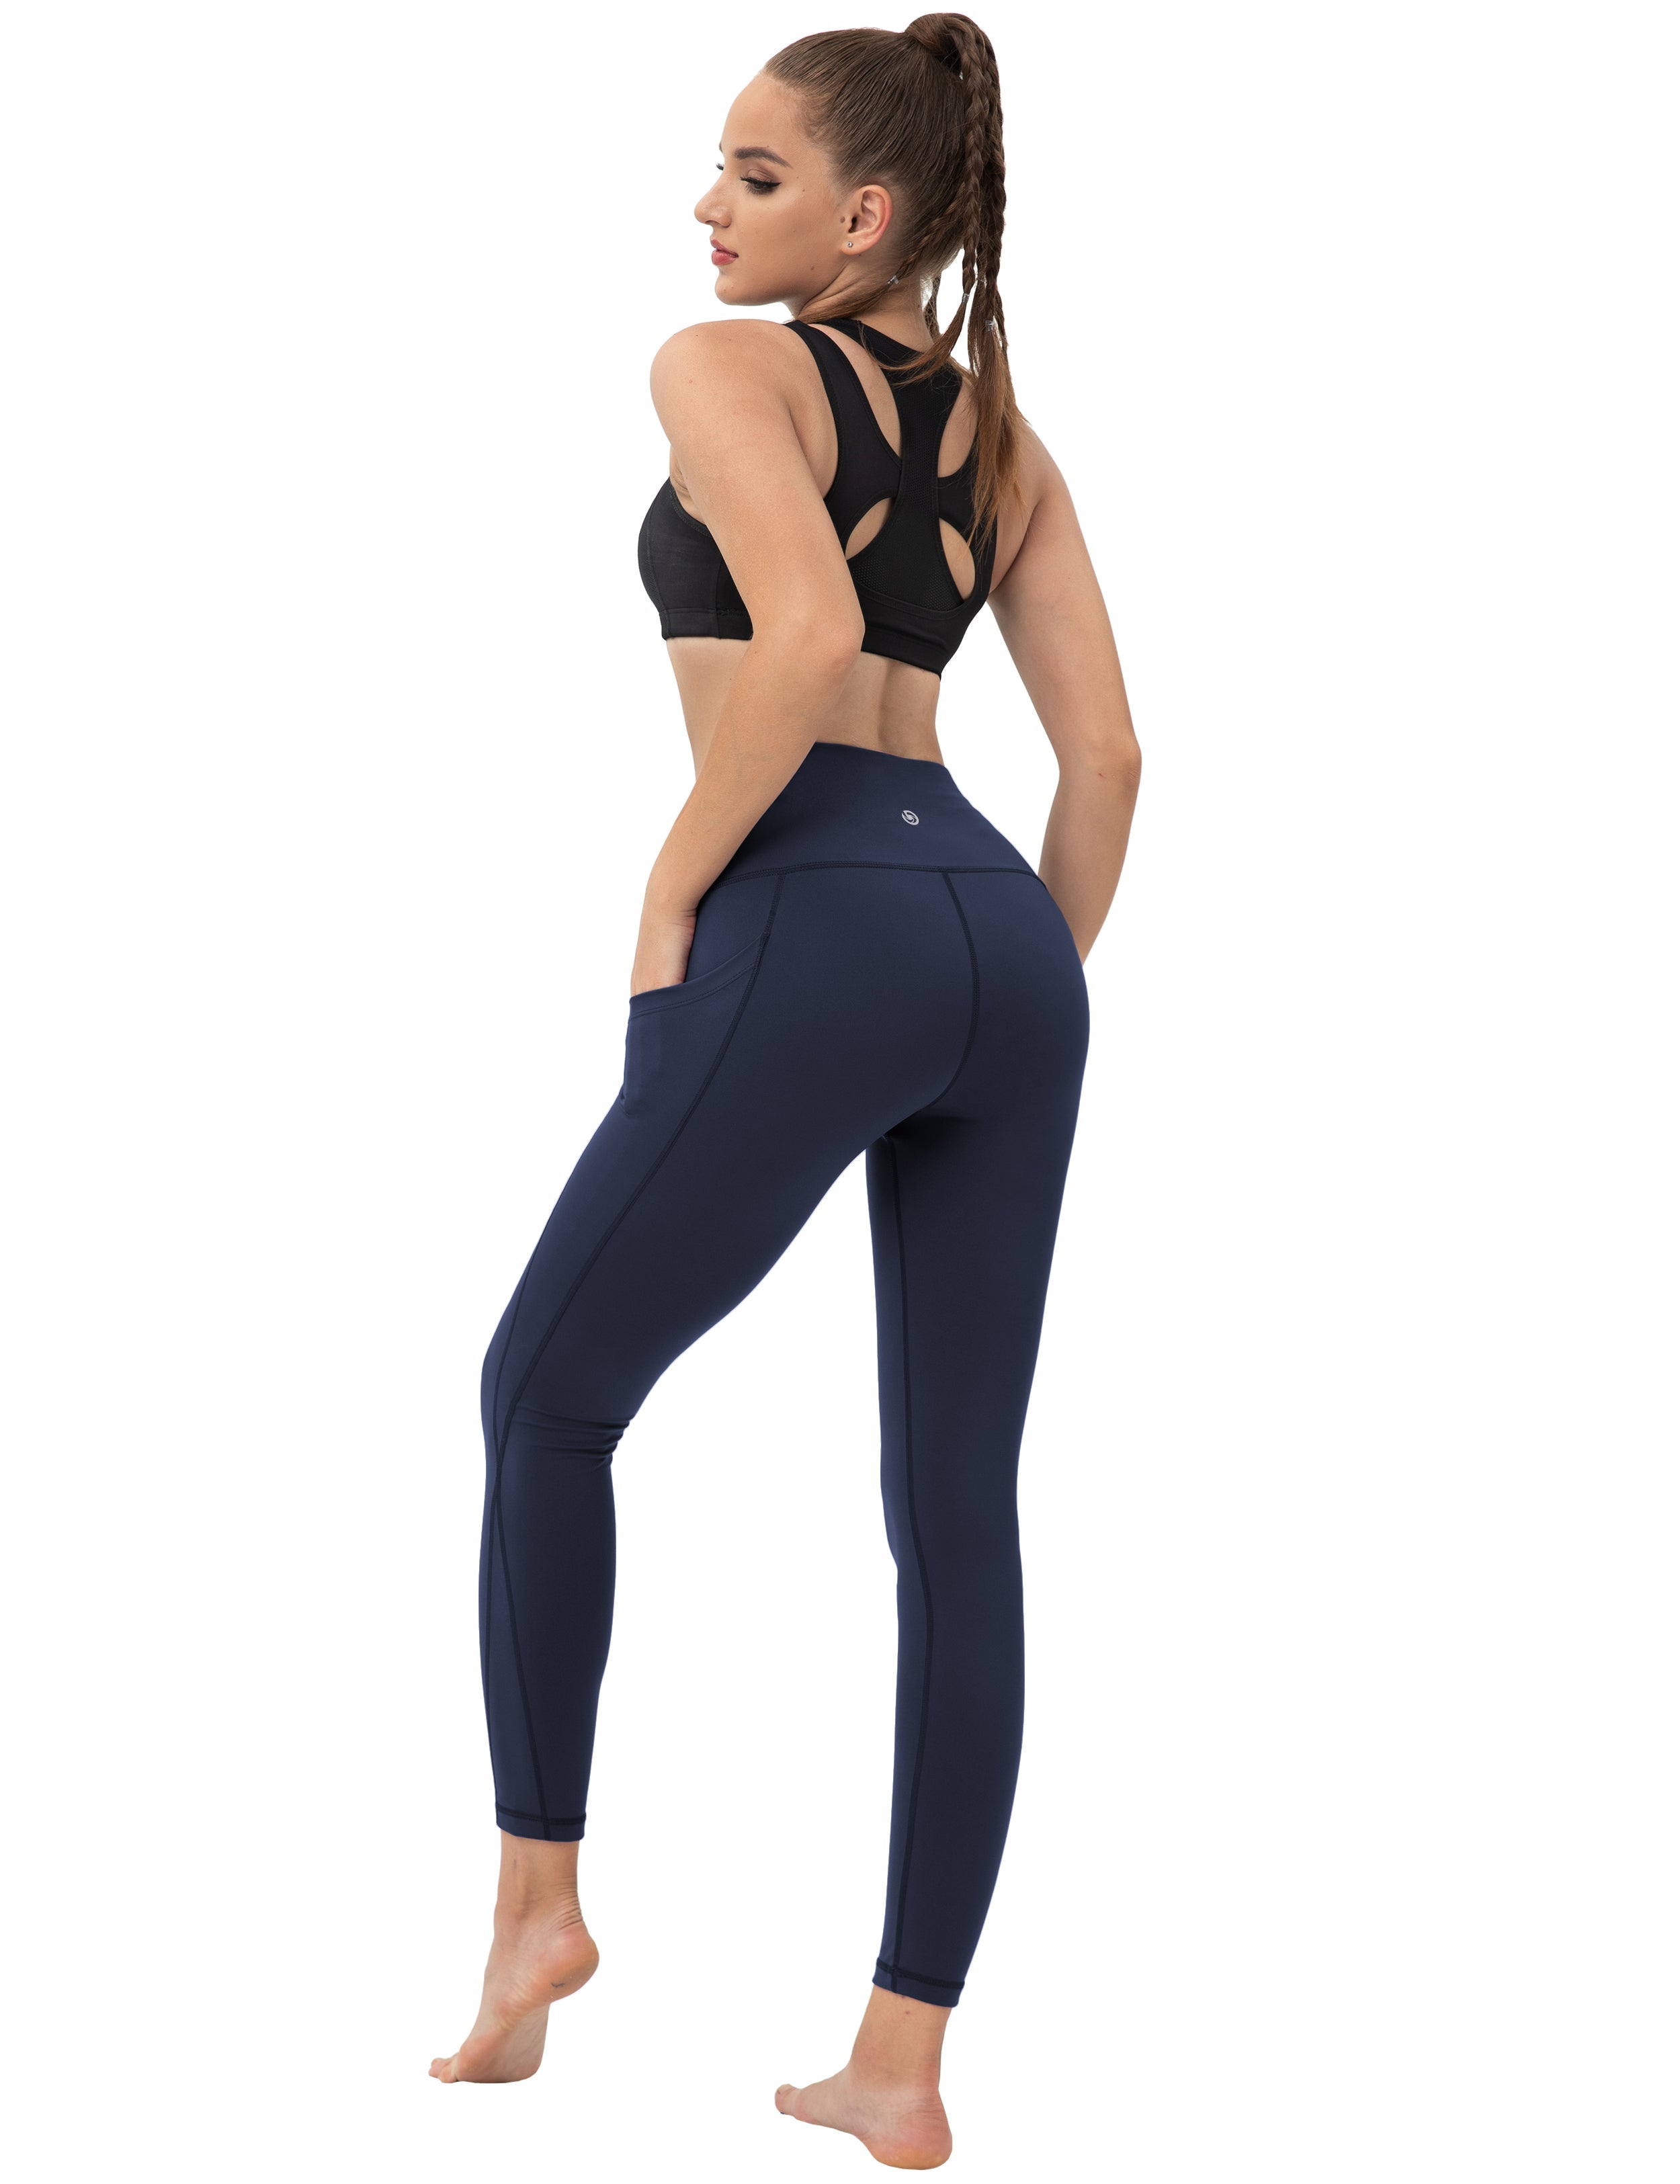 High Waist Side Pockets Tall Size Pants darknavy 75% Nylon, 25% Spandex Fabric doesn't attract lint easily 4-way stretch No see-through Moisture-wicking Tummy control Inner pocket